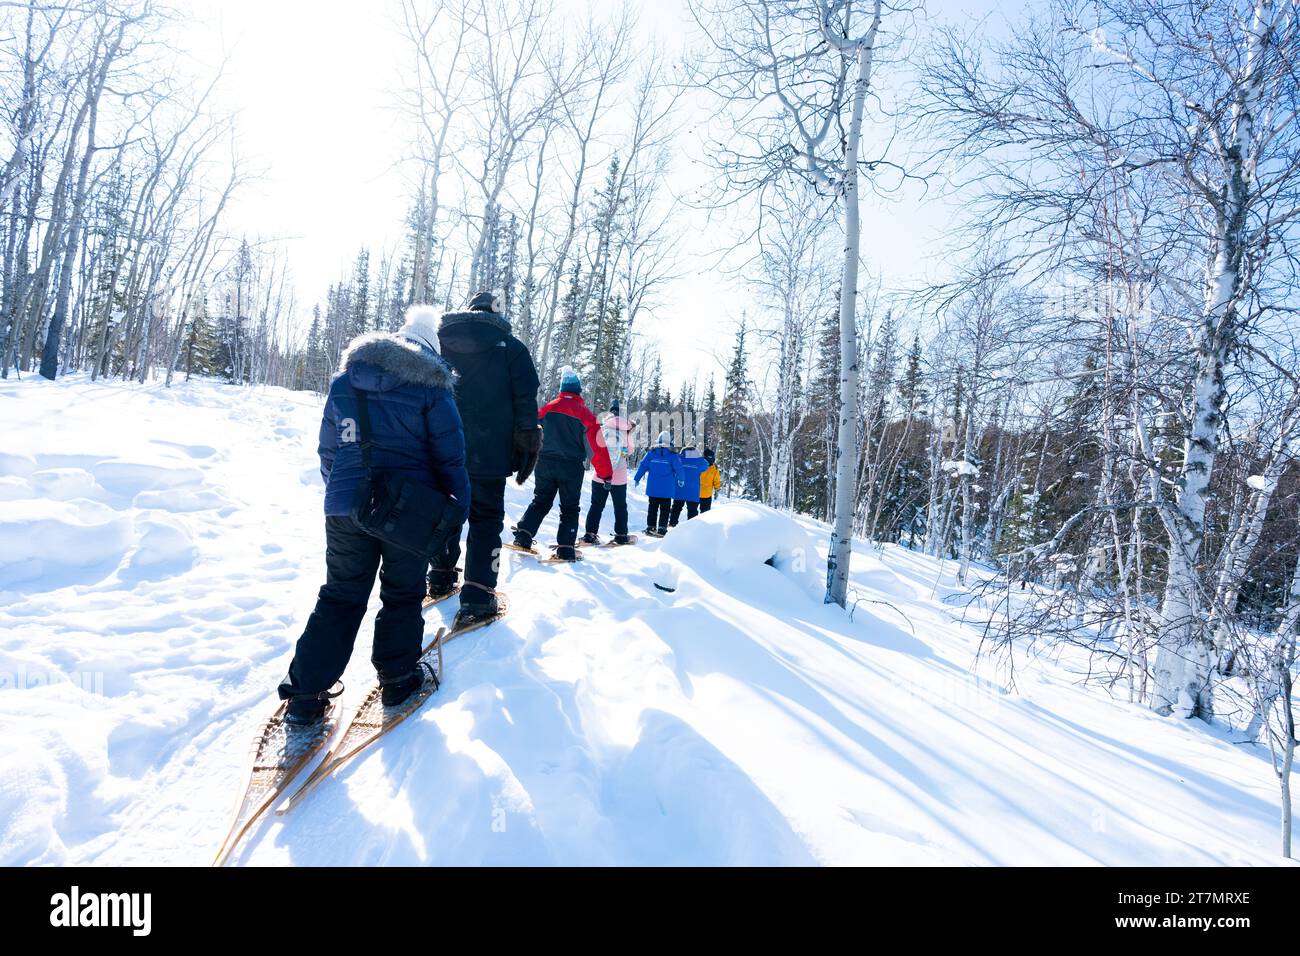 Snowshoeing through a snowy forest on large traditional wooden snowshoes, Yellowknife, Northwest Territories, Canada Stock Photo